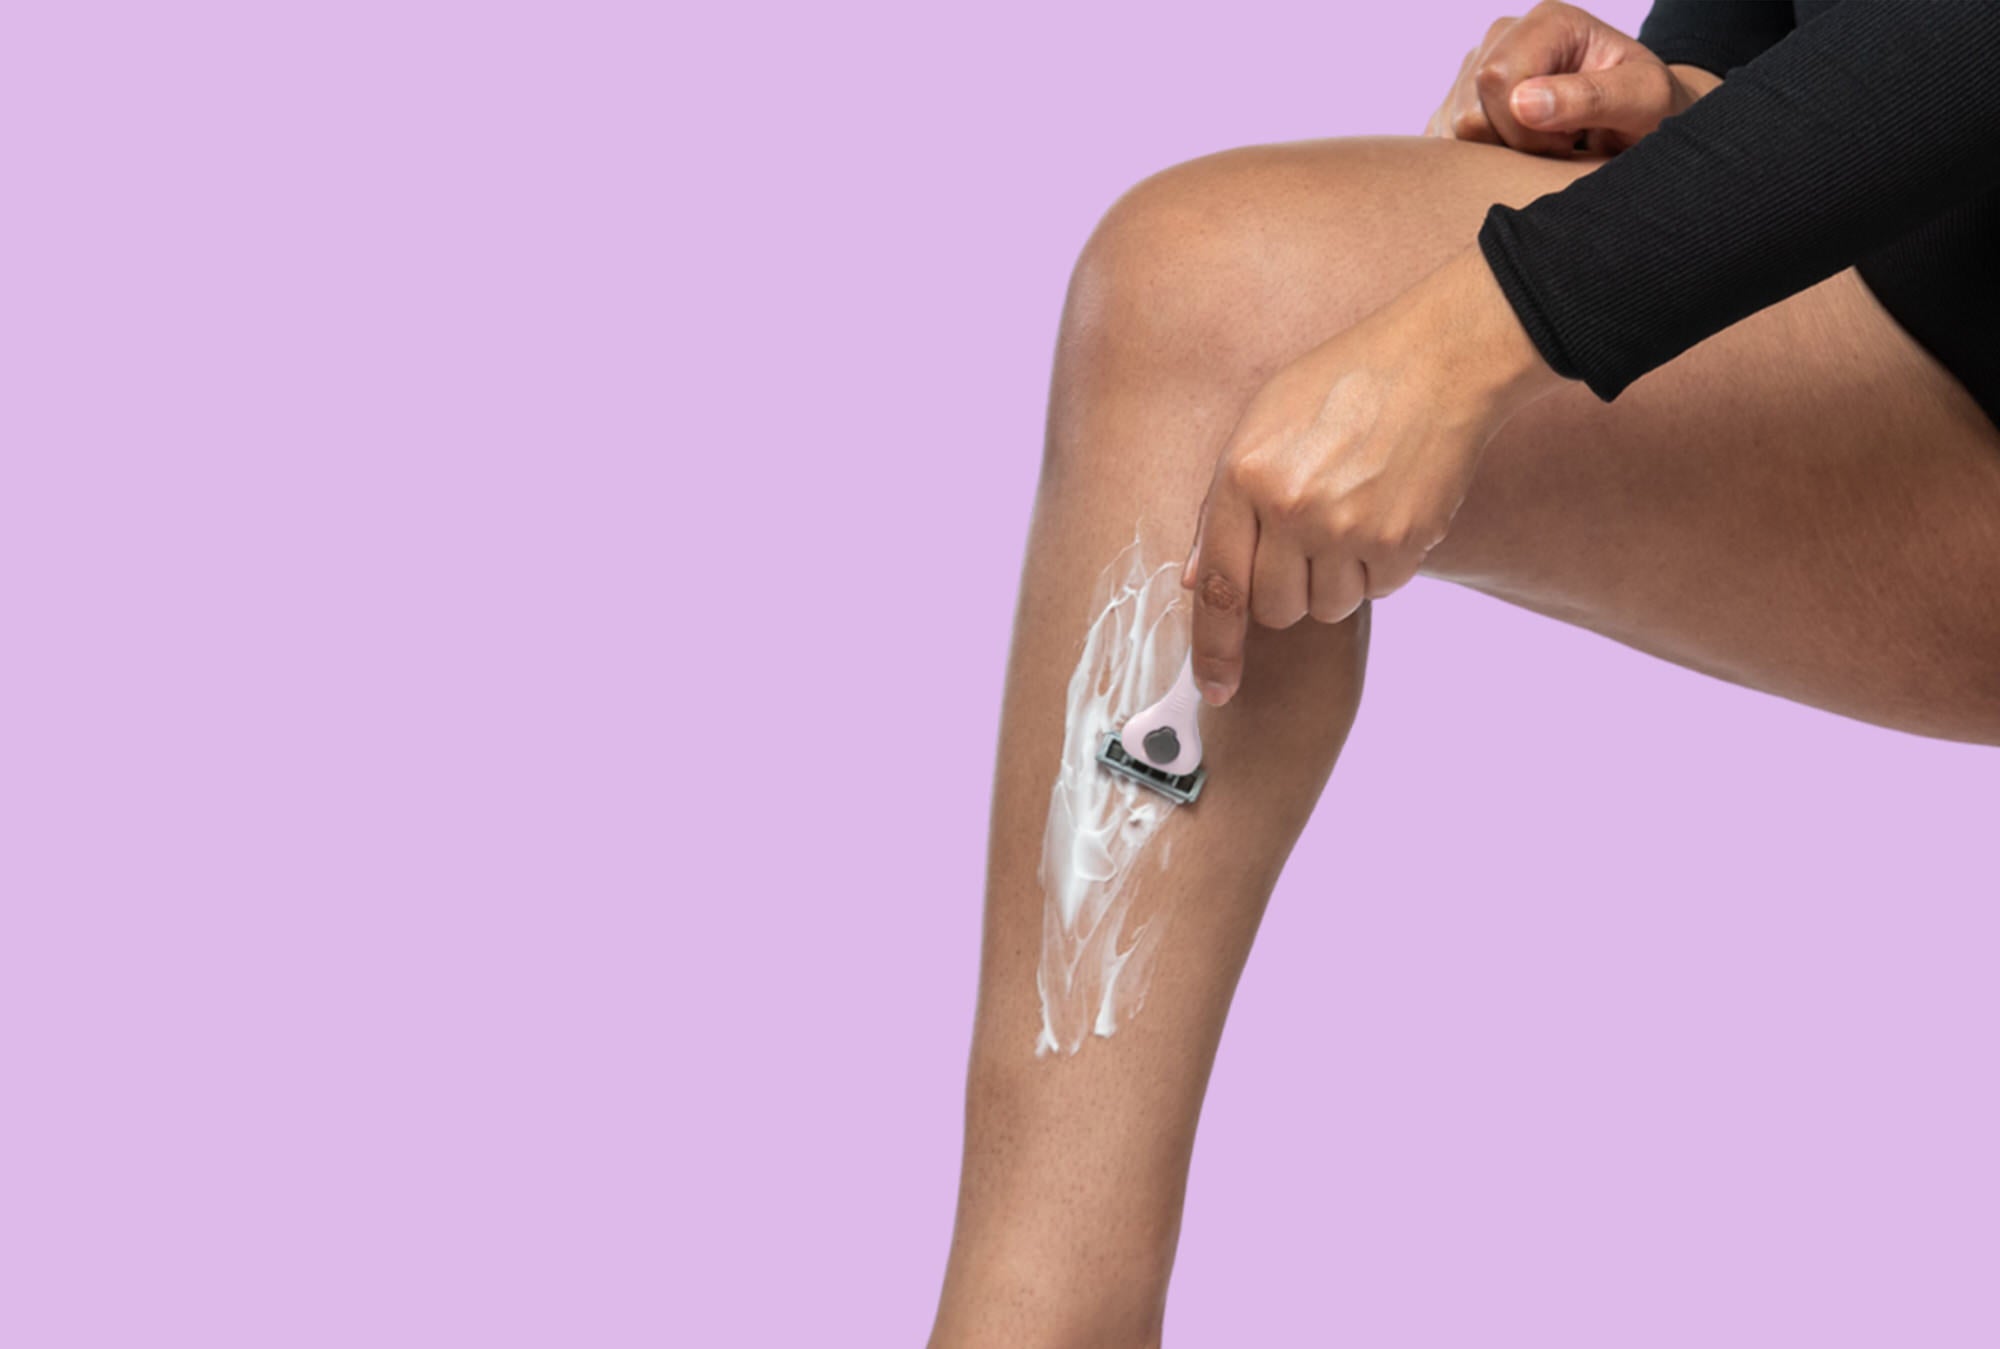 How to Shave Sensitive Skin